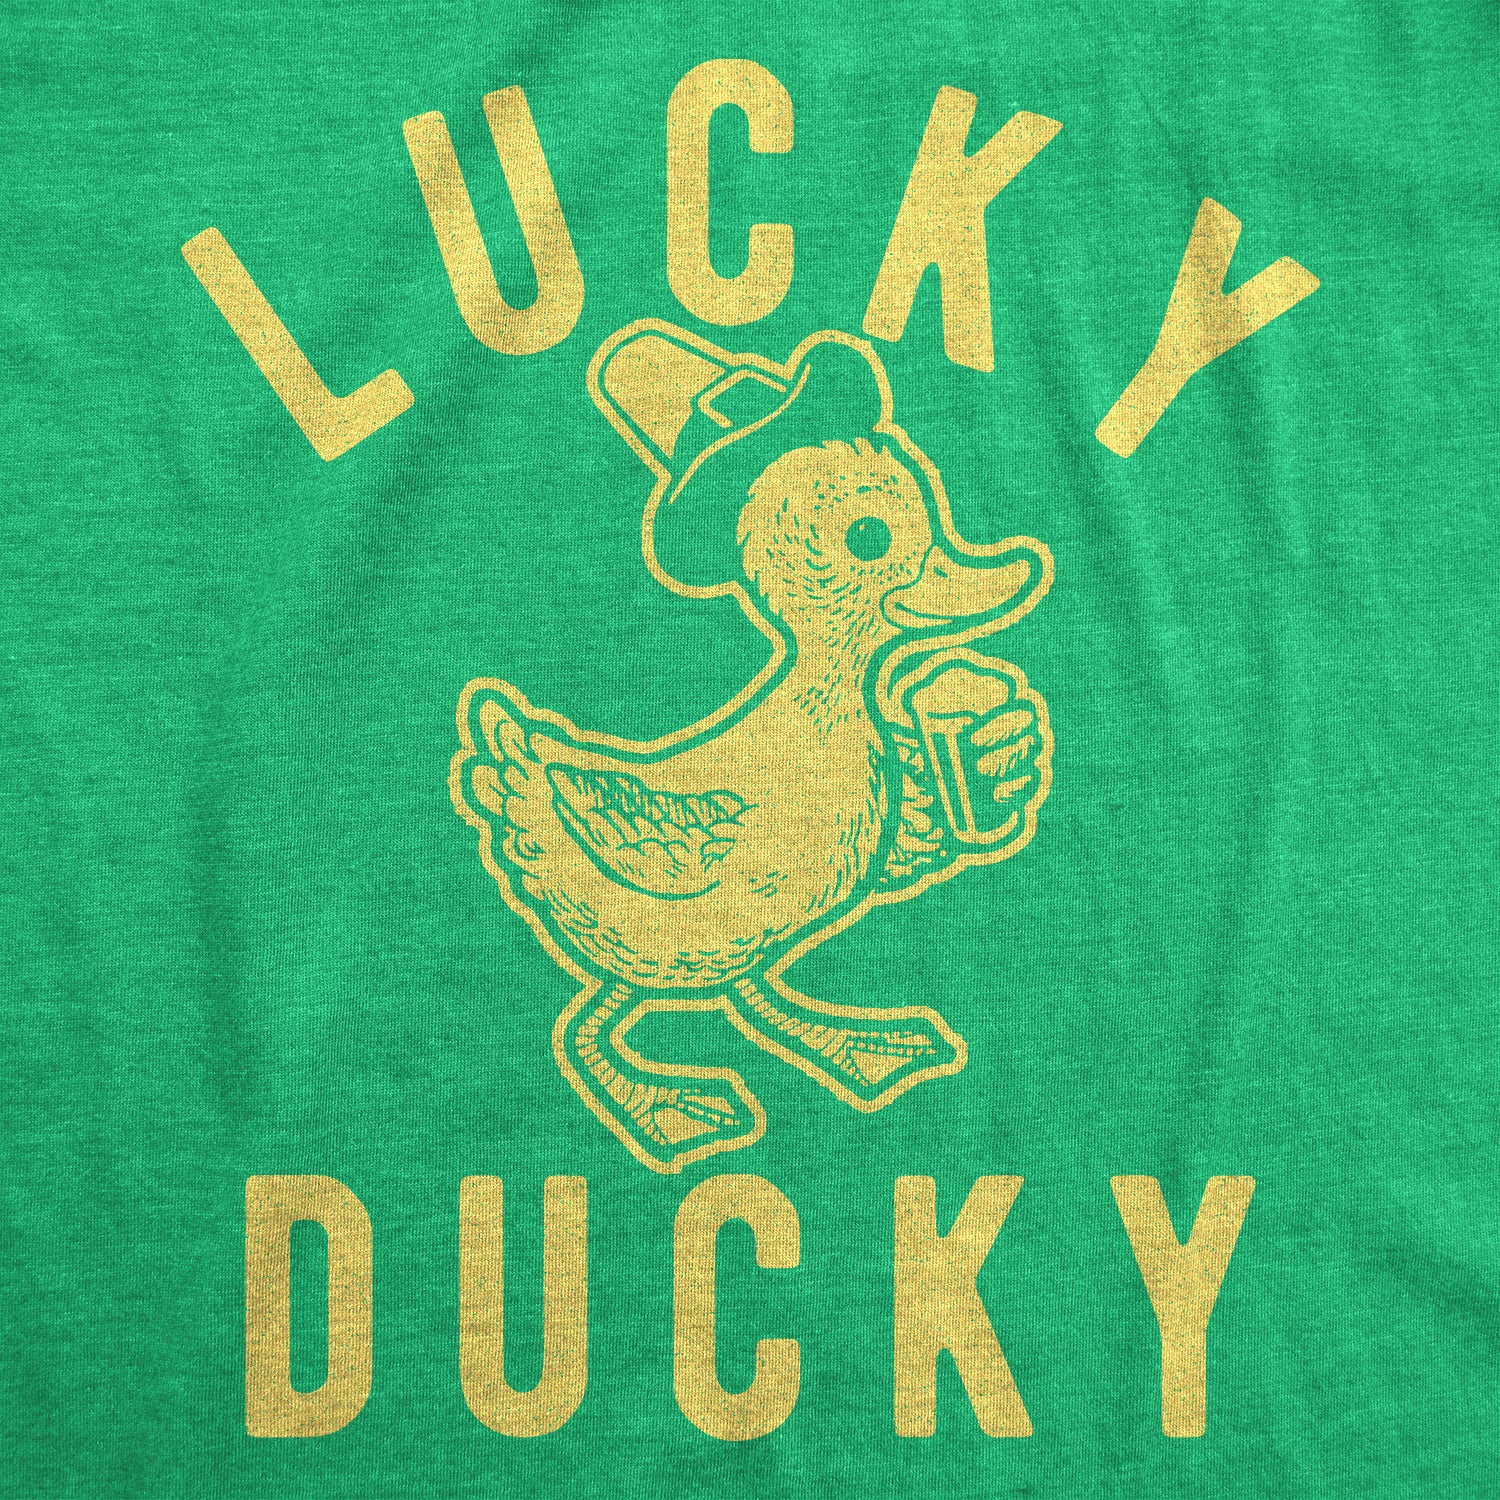 Funny Heather Green Lucky Ducky Womens T Shirt Nerdy Easter Drinking Tee